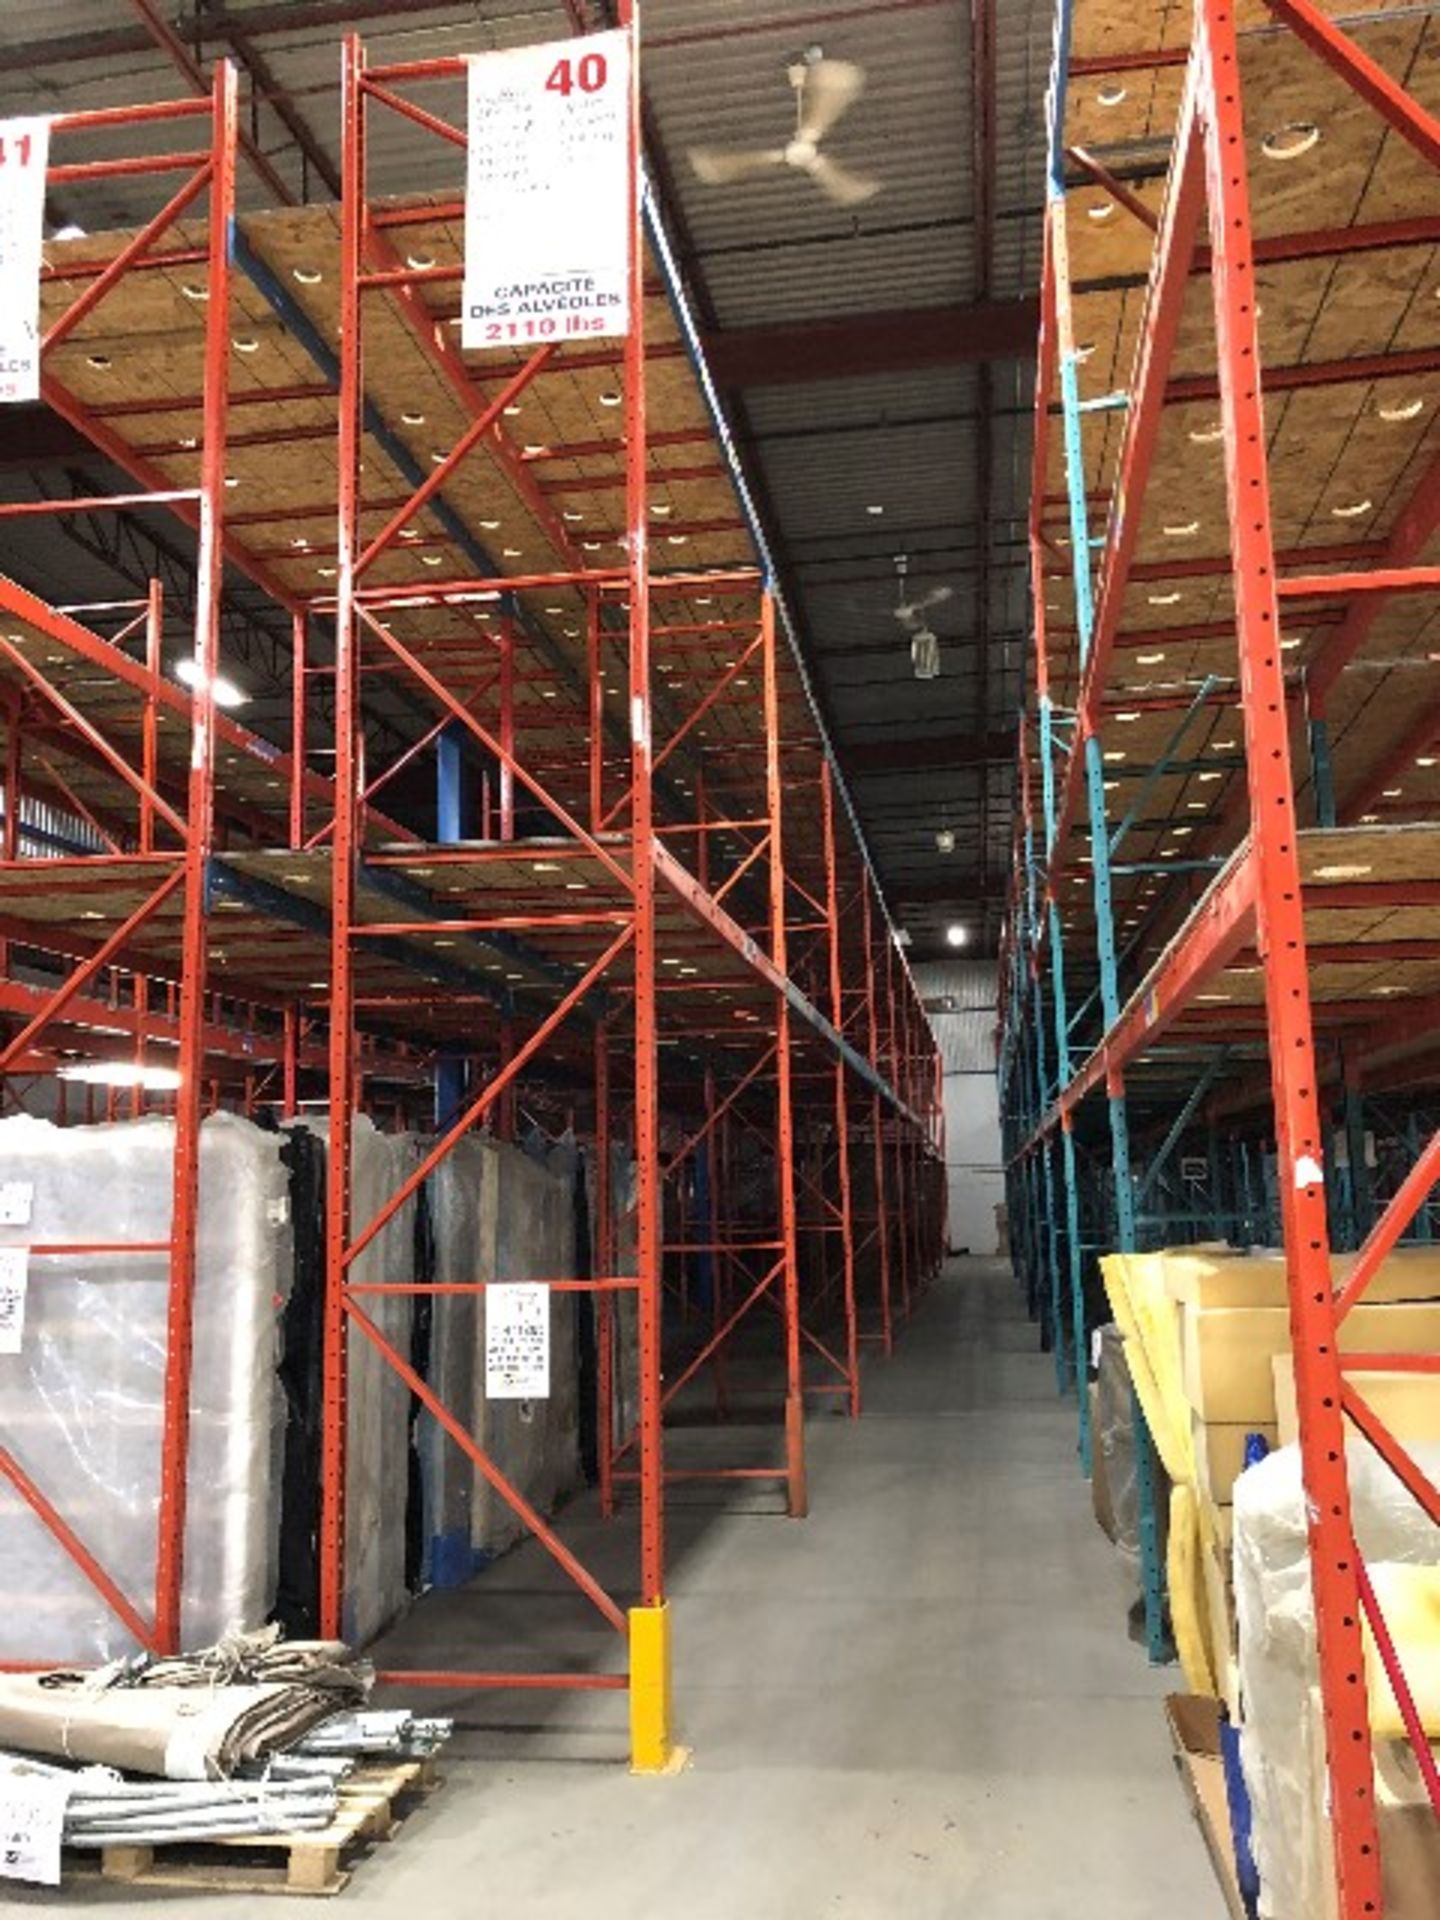 Pallet racking: H.20'xW.44”,40pcs 12'&14'long bars w/40 MDF sheets & 108 safety bars,10 sections